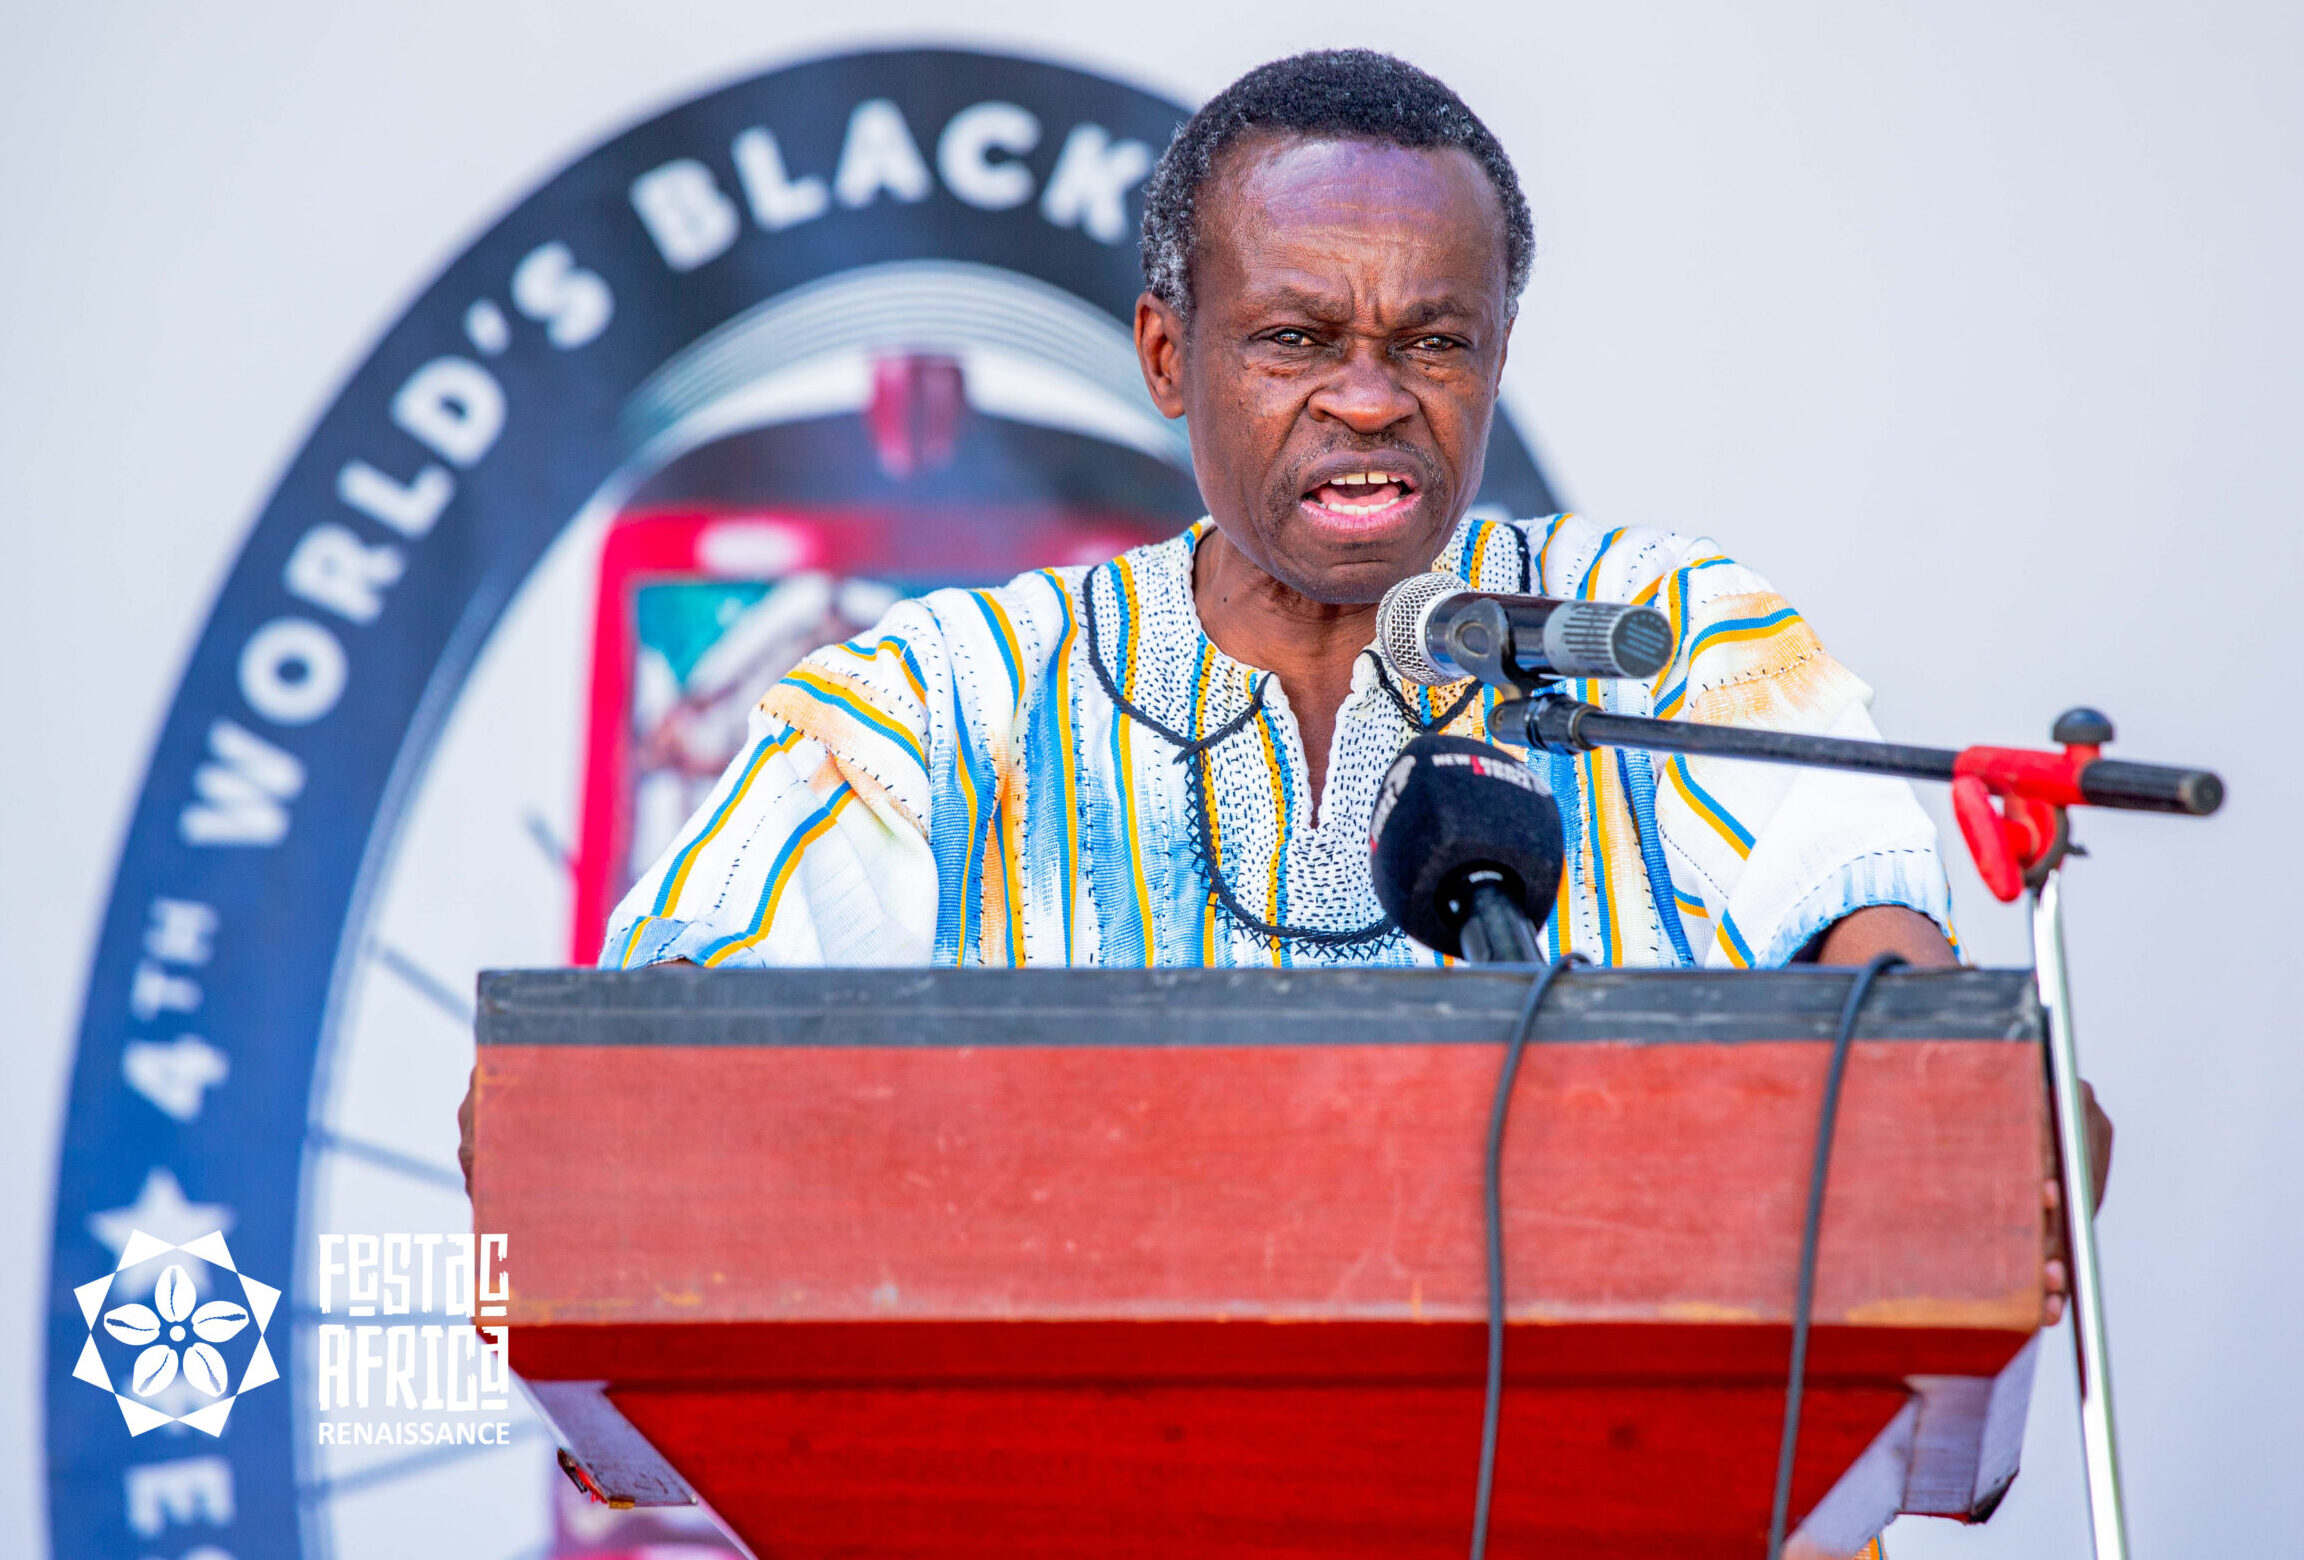 Profound Prof. PLO Lumumba’s Speech at FESTAC AFRICA 2023 Festival in Arusha, Tanzania on 22nd May 2023 May